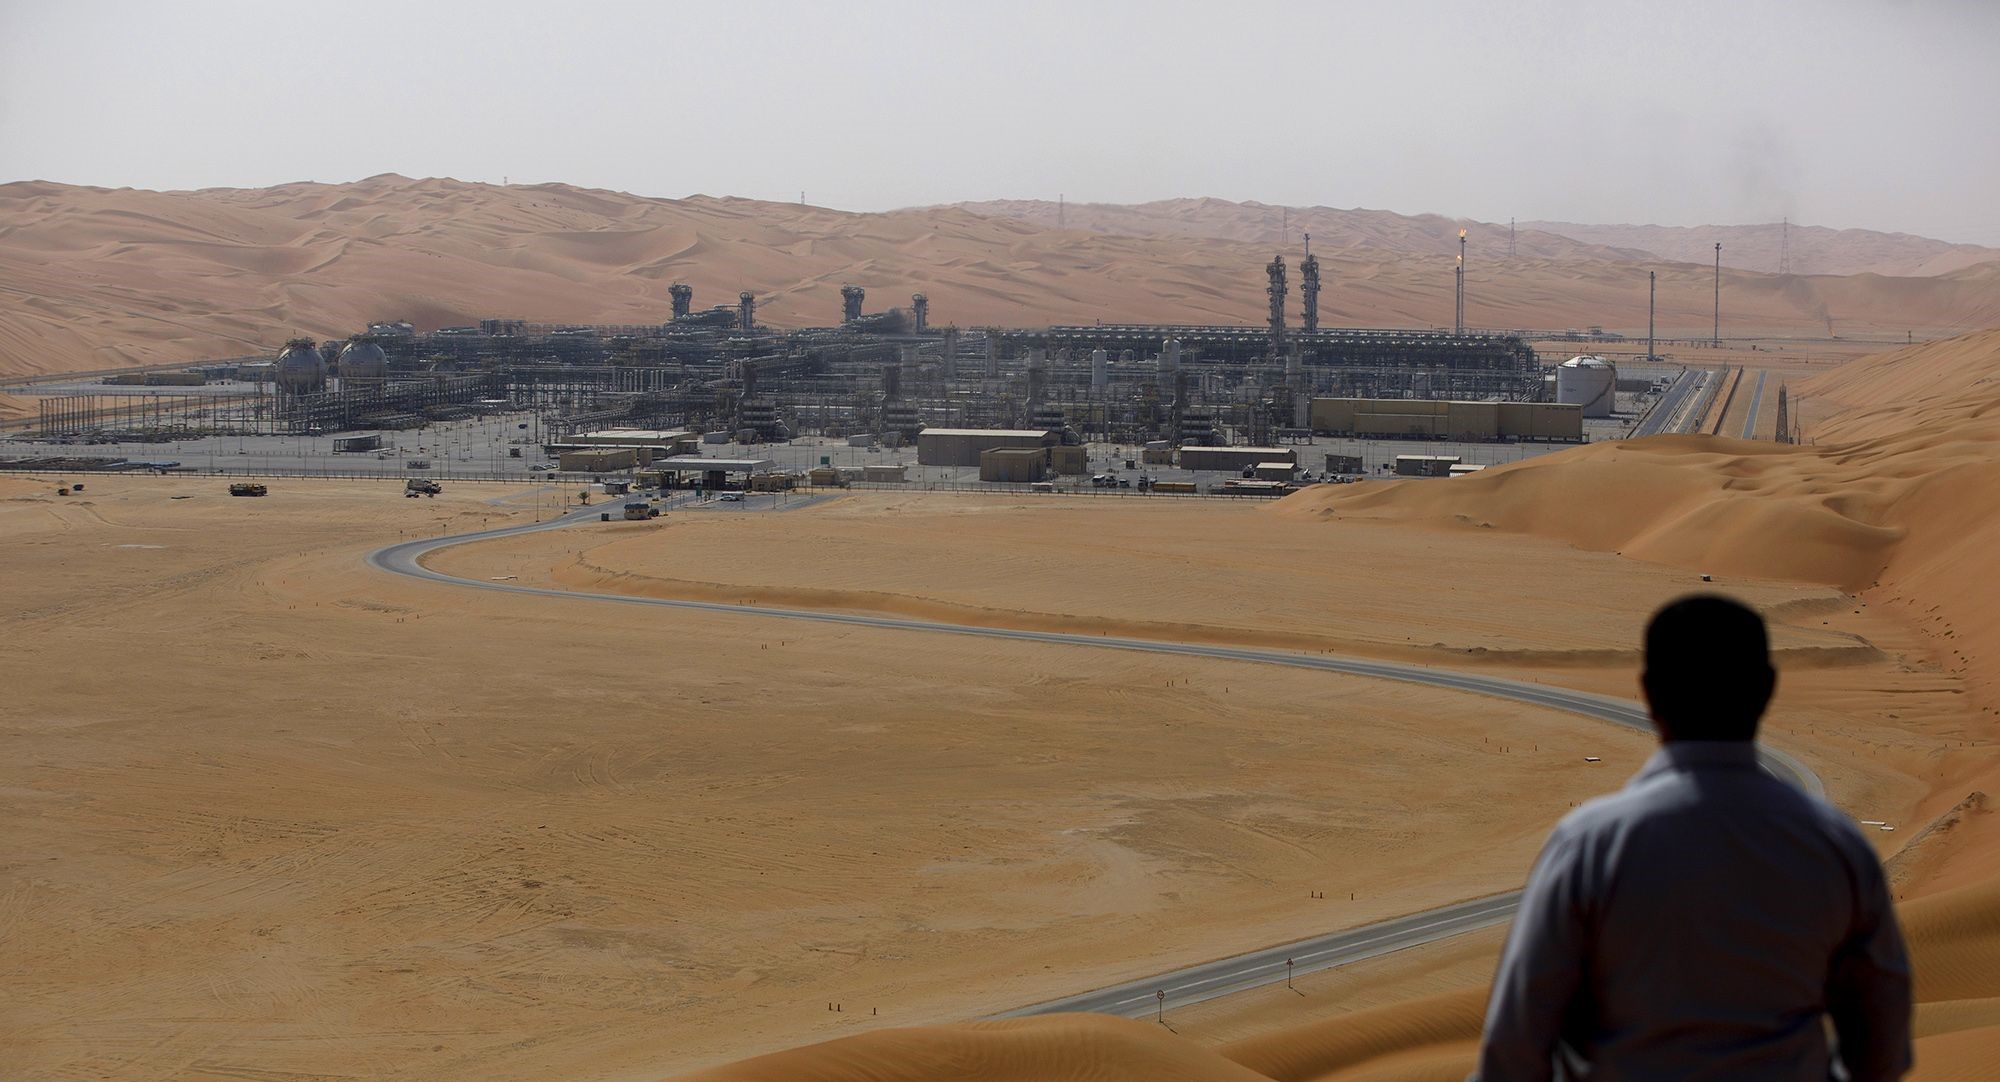 Worker in bottom right hand corner looks over desert to industrial facility